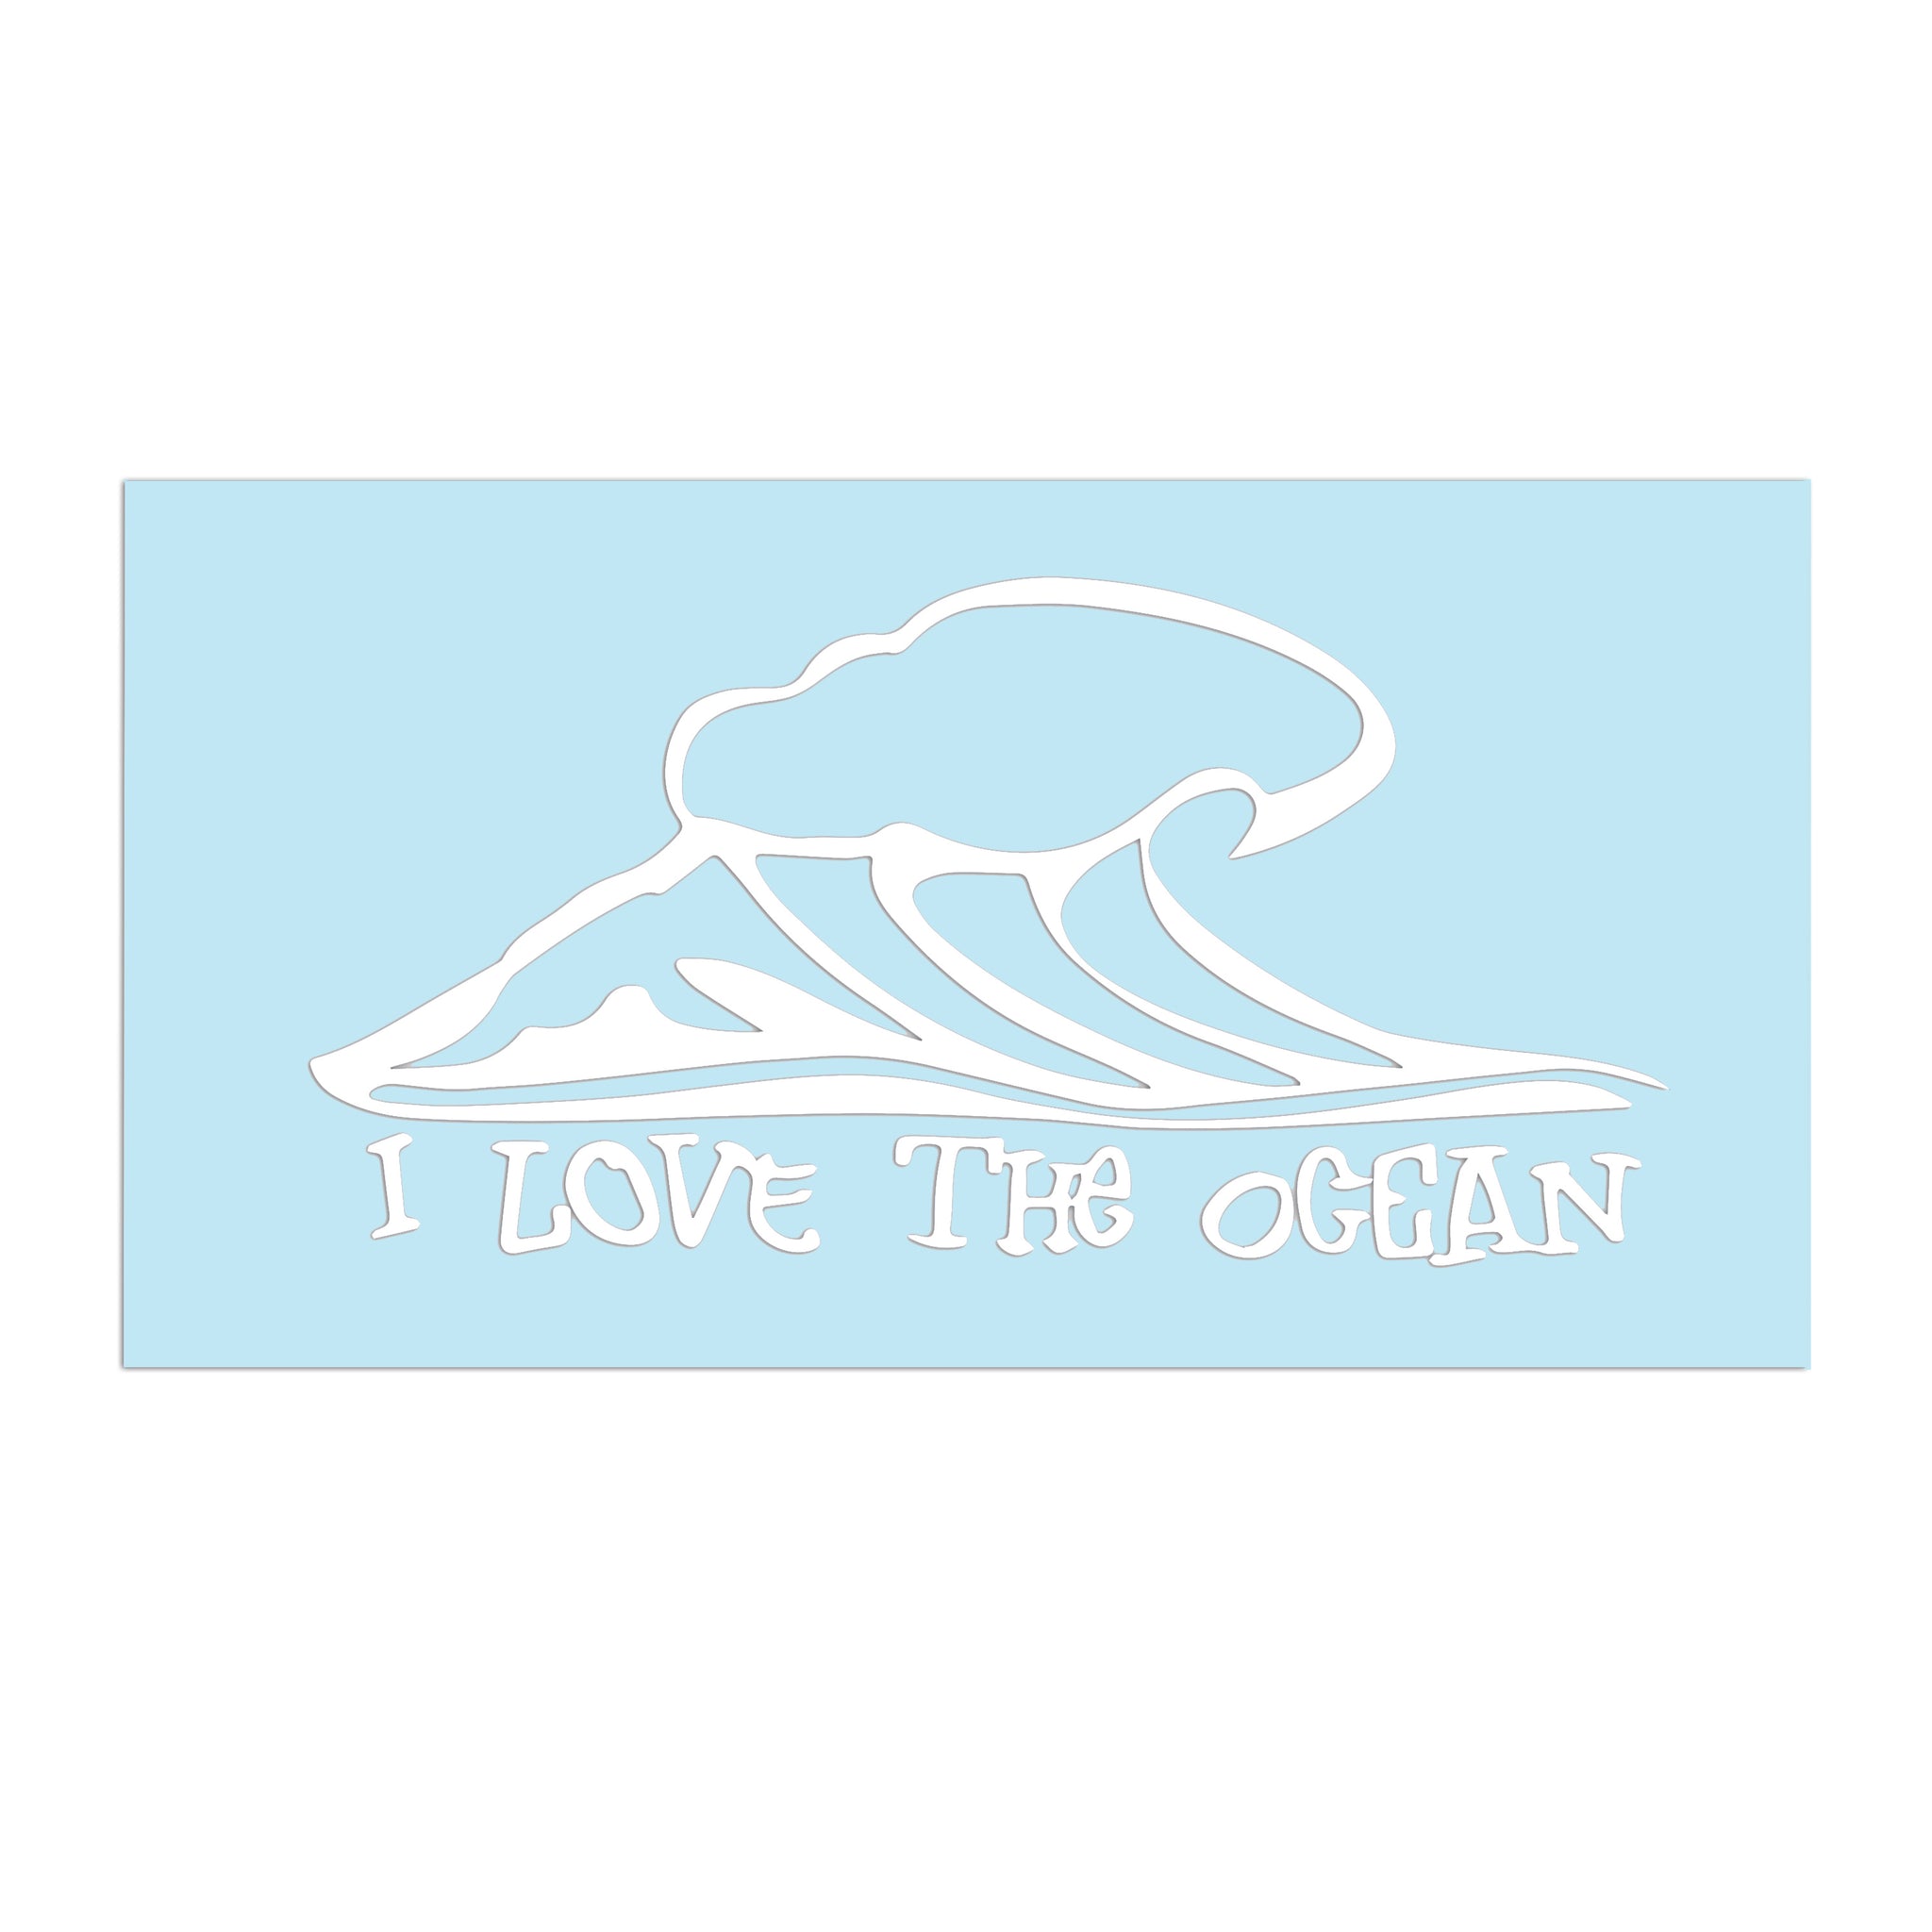 I Love The Ocean Vinyl Sticker (Two color options)